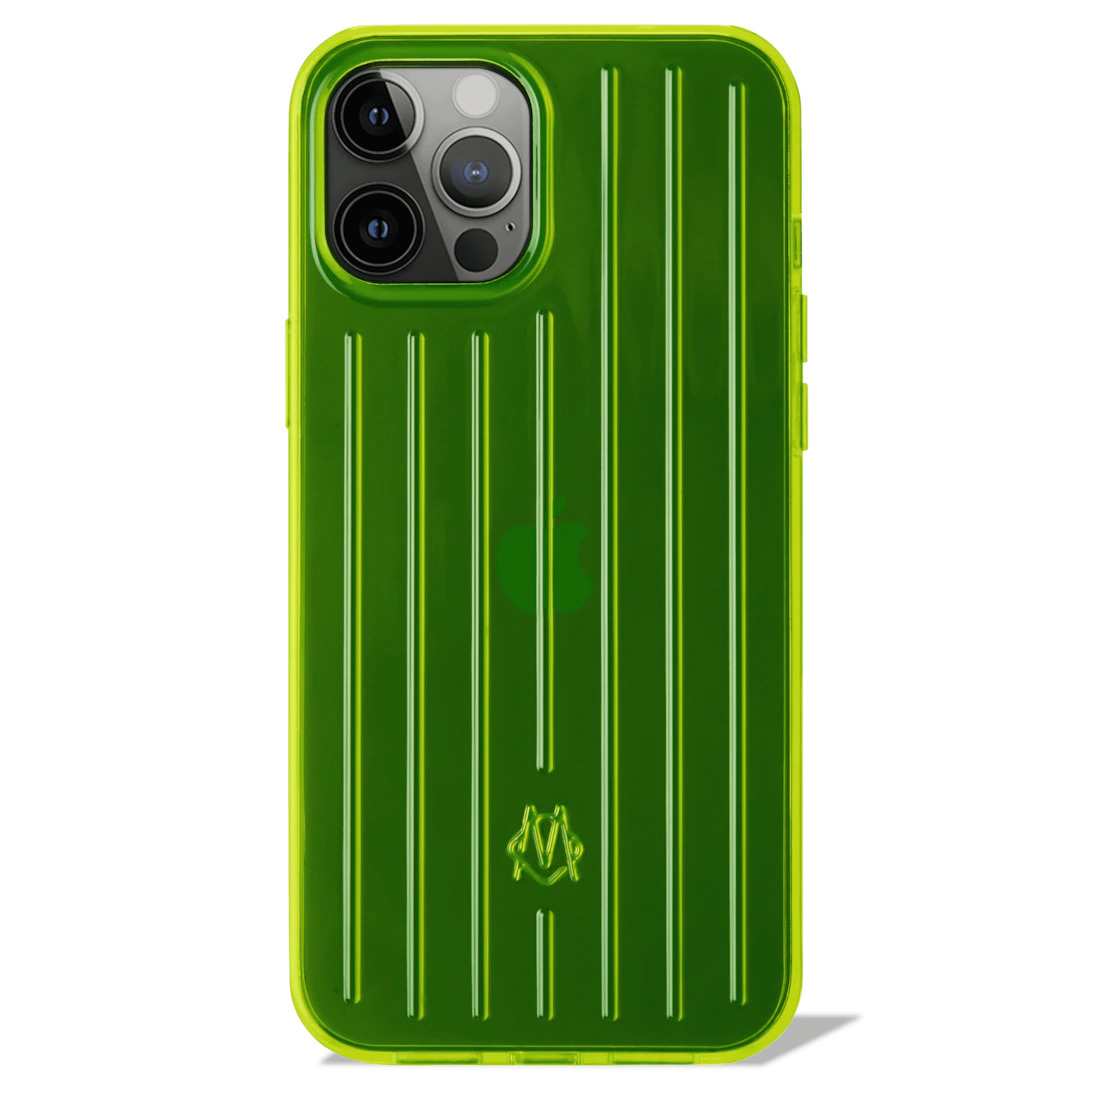 iPhone Accessories Neon Lime Case for iPhone 12 Pro Max - 1